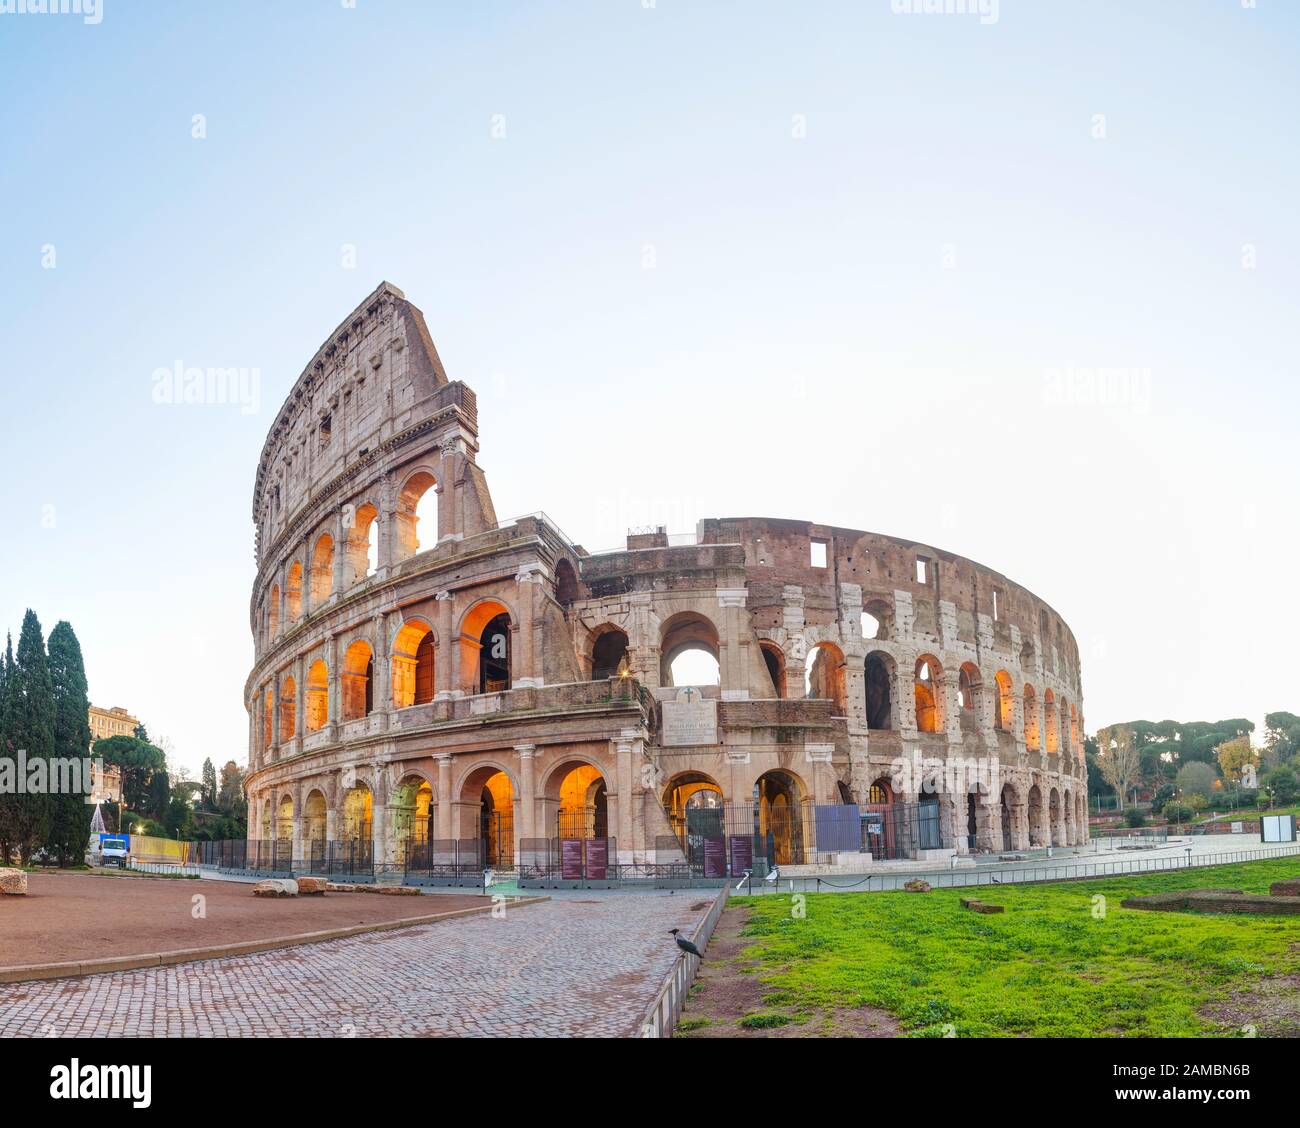 The Colosseum or Flavian Amphitheatre in Rome, Italy at sunrise Stock Photo